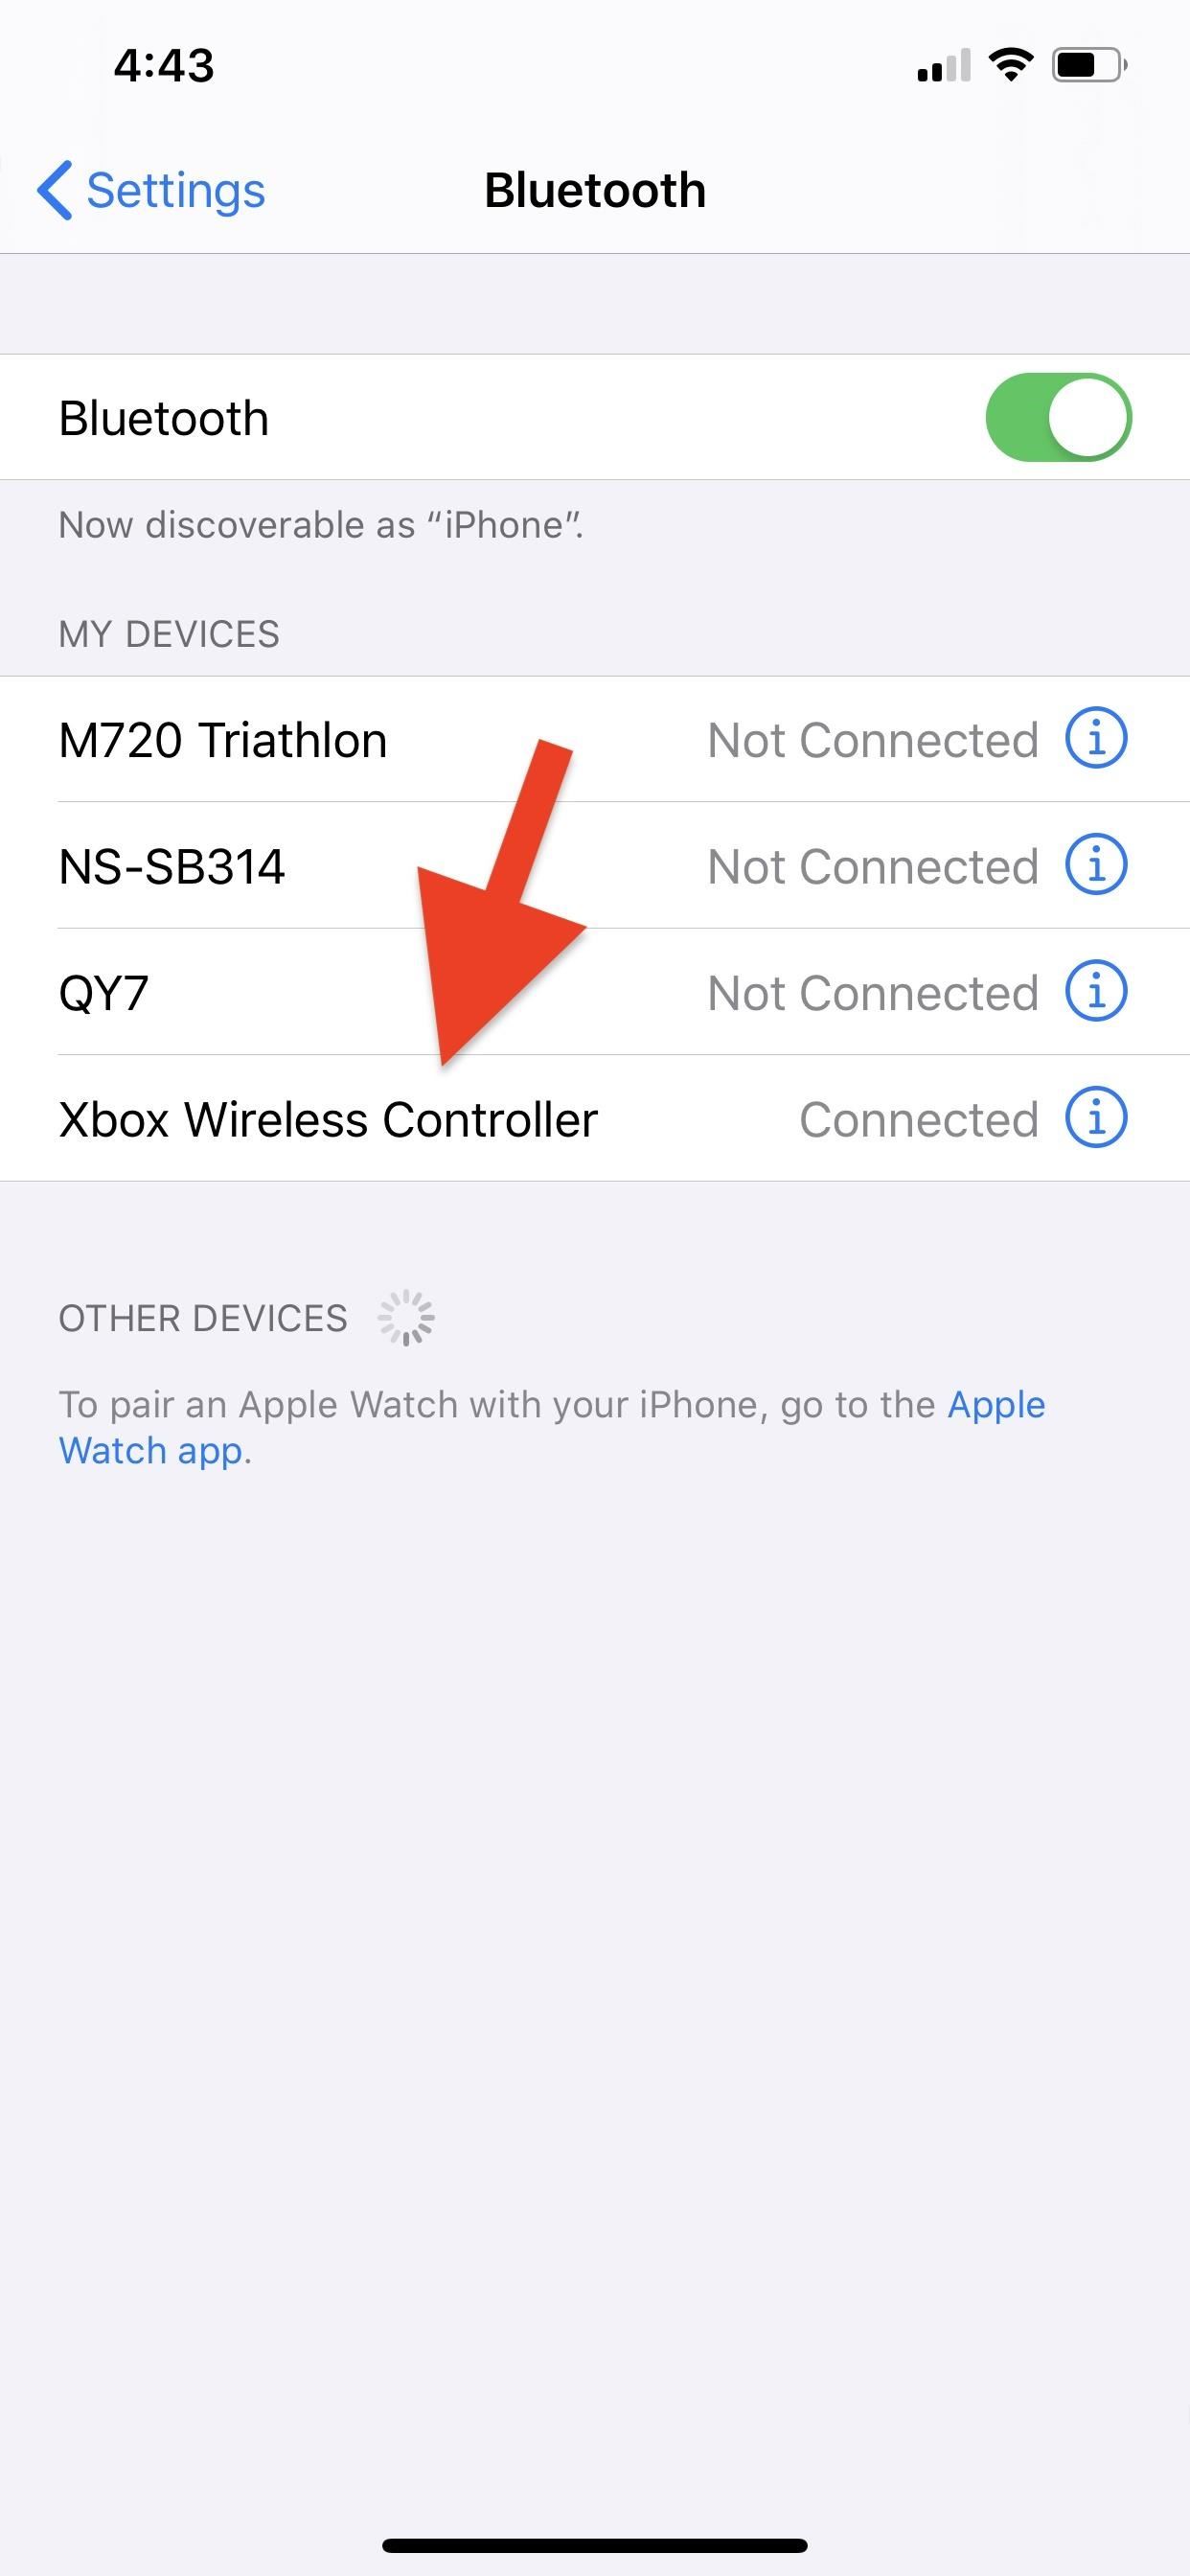 How to Connect Your Xbox Wireless Controller to Your iPhone to Play Games More Easily